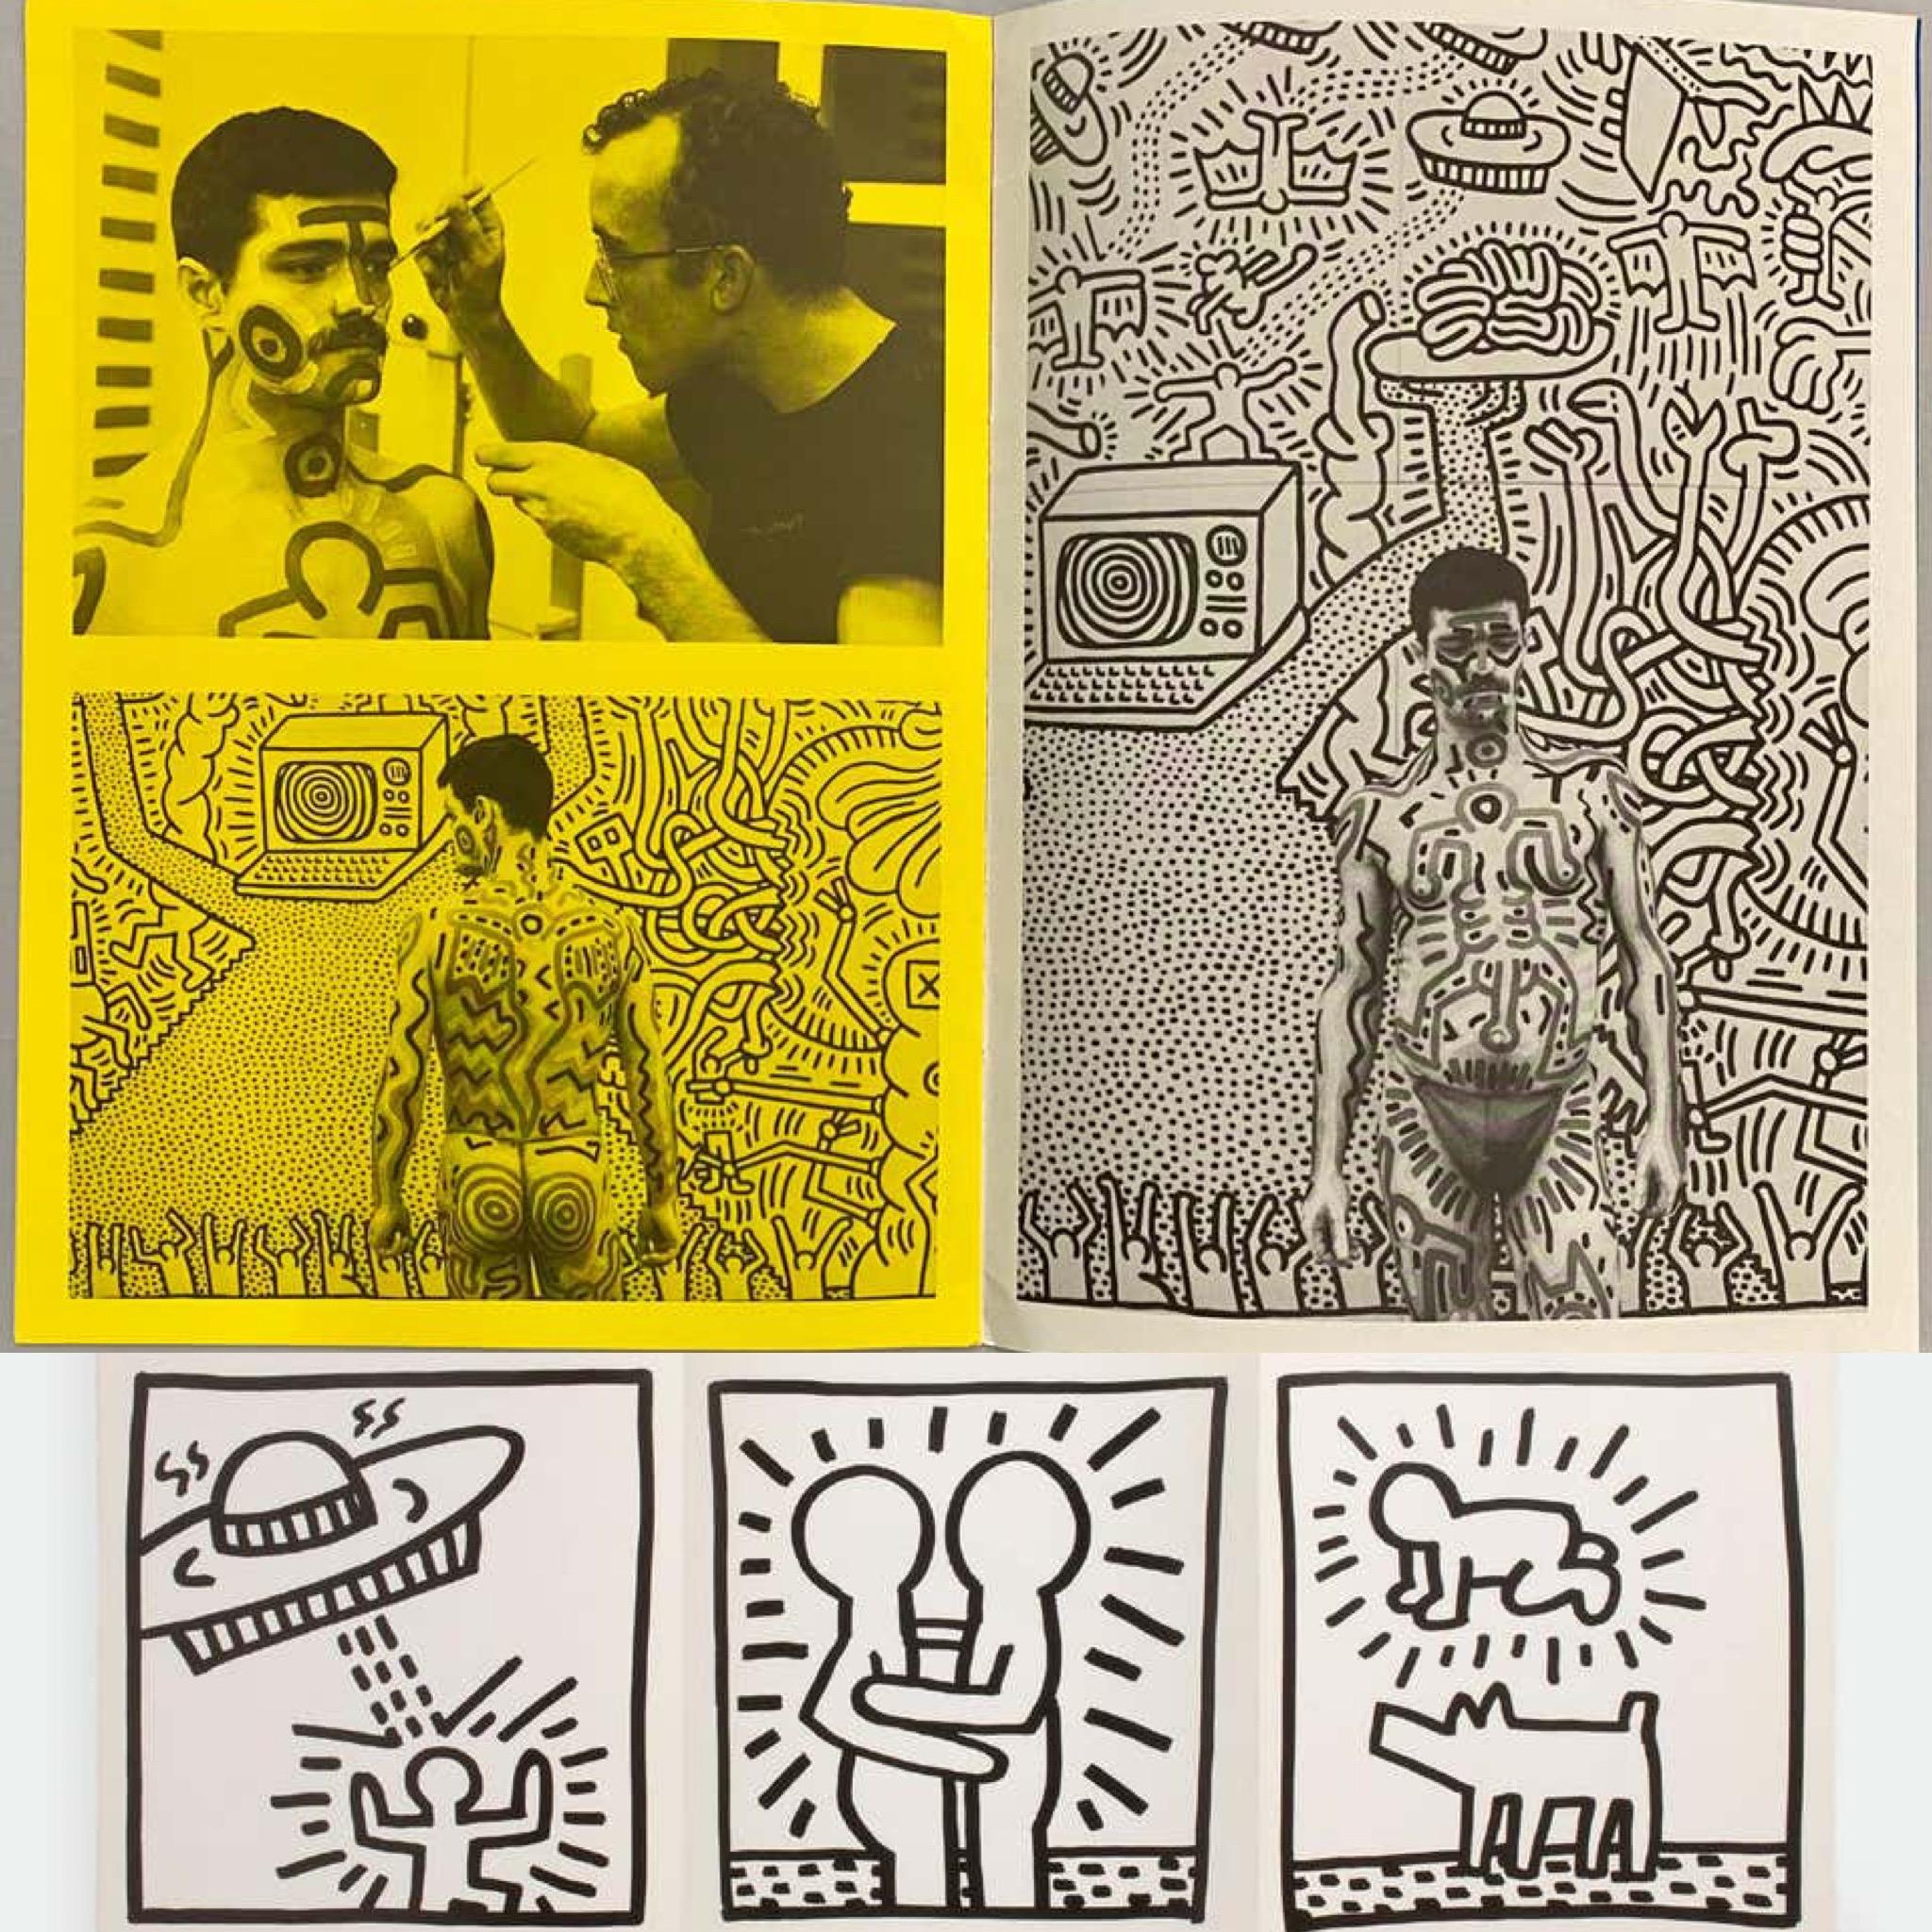 Paul Maenz 1984 catalog & announcement (set of 2) - Art by (after) Keith Haring